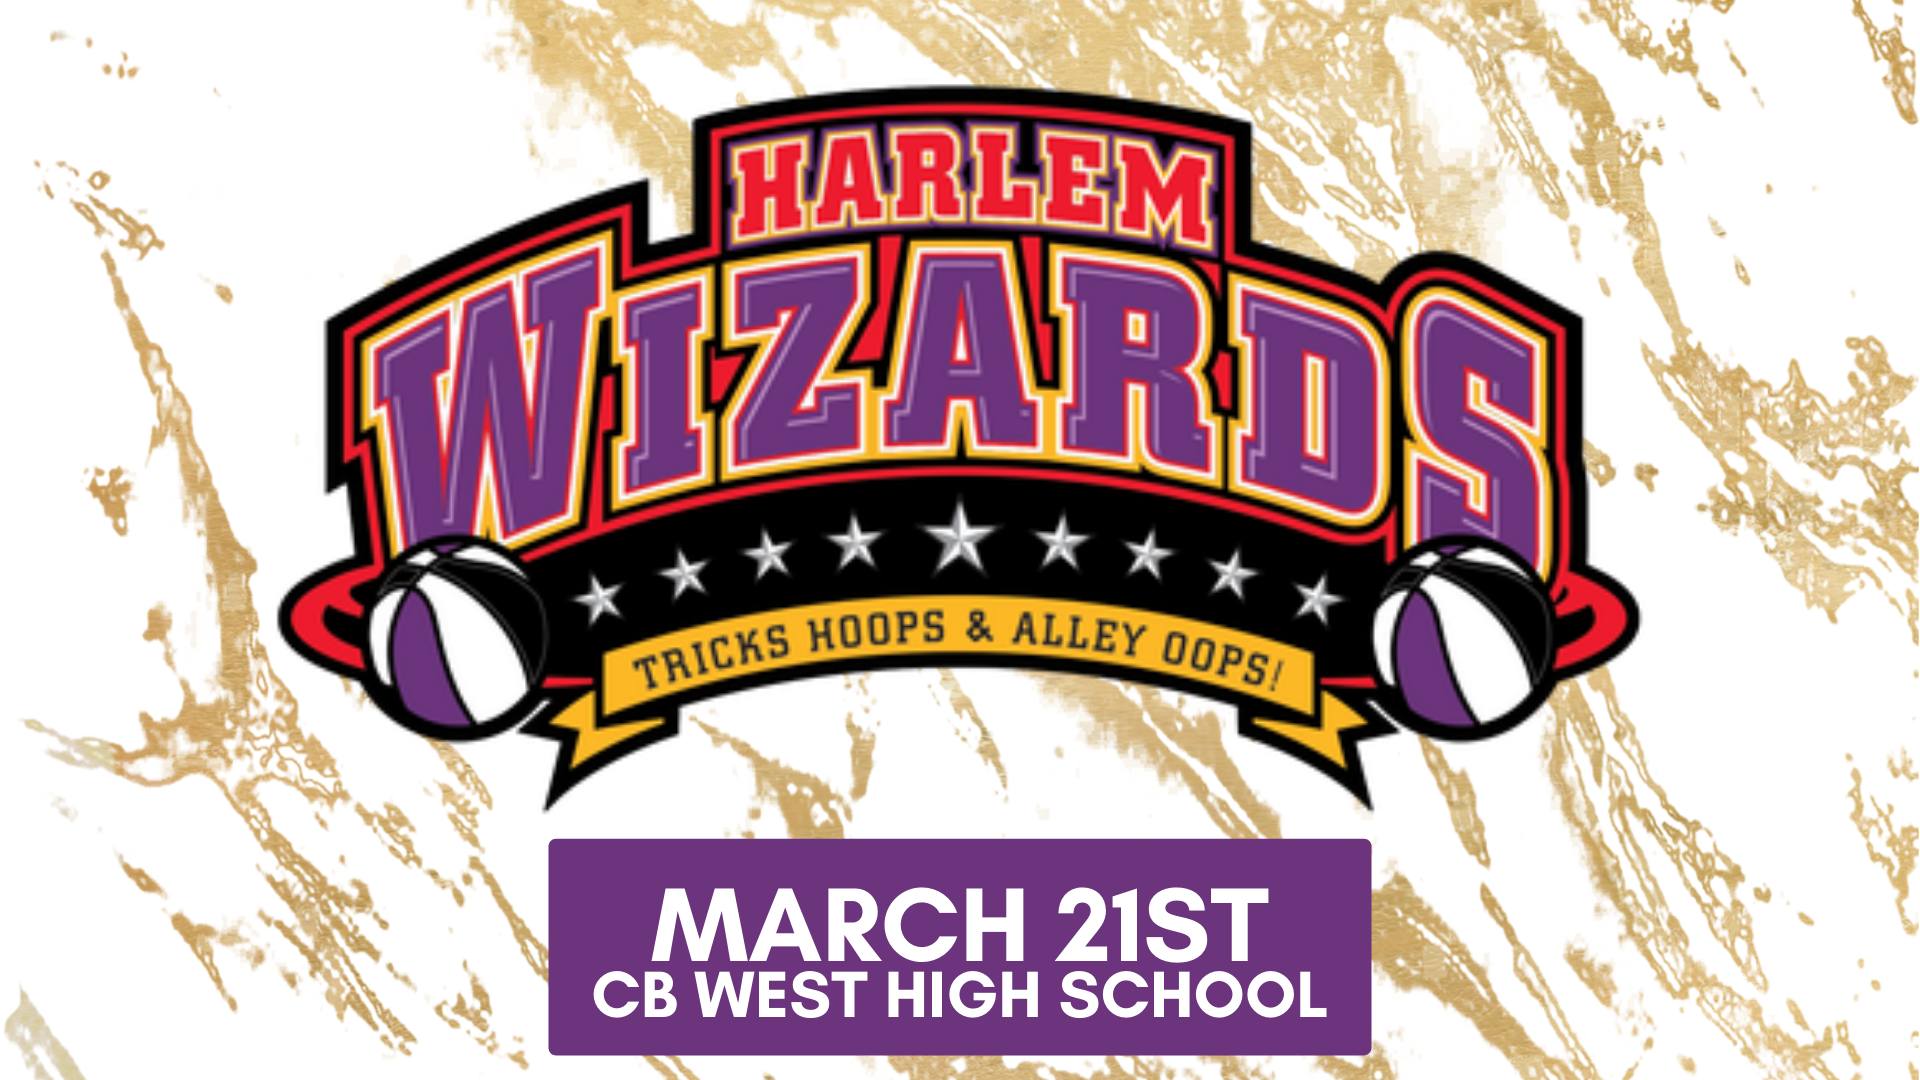 Harlem Wizards set to play benefit game at CM